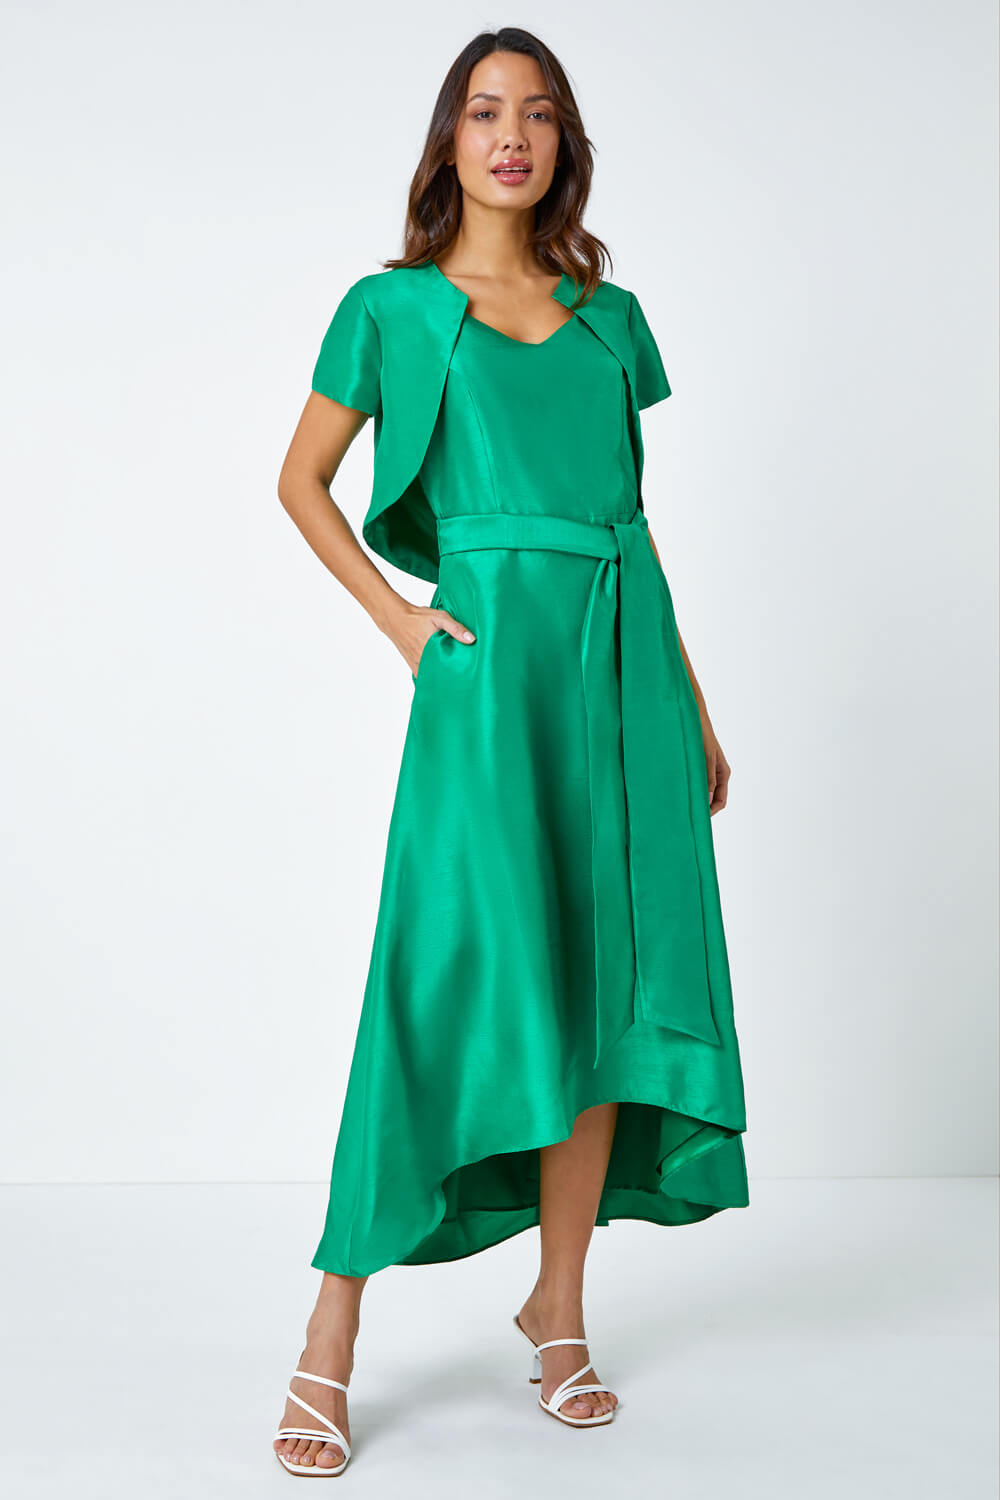 Green Dipped Hem Fit & Flare Dress, Image 2 of 5